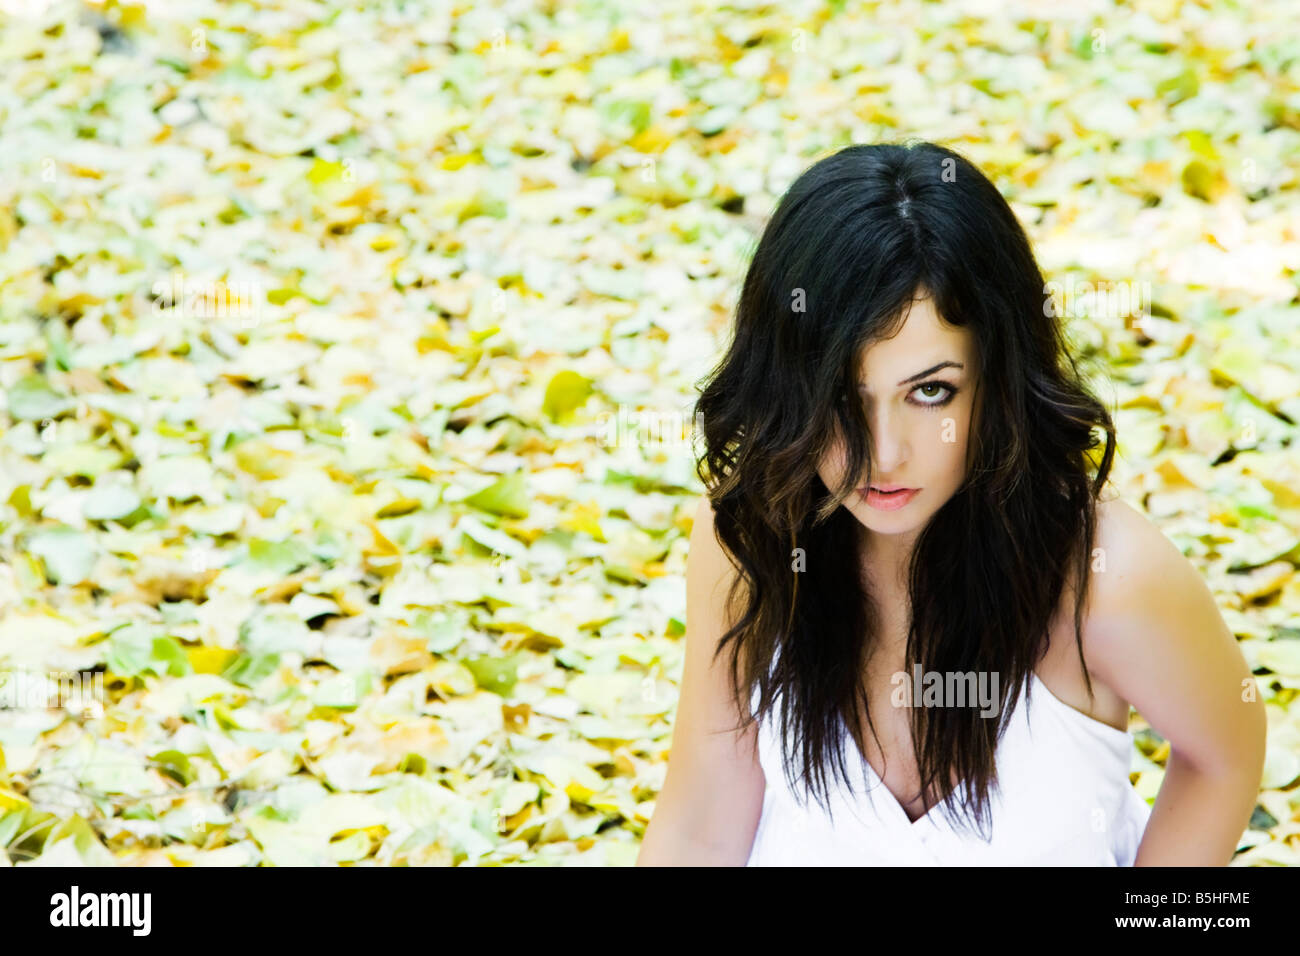 Beautiful woman staring at camera in a fall background Stock Photo